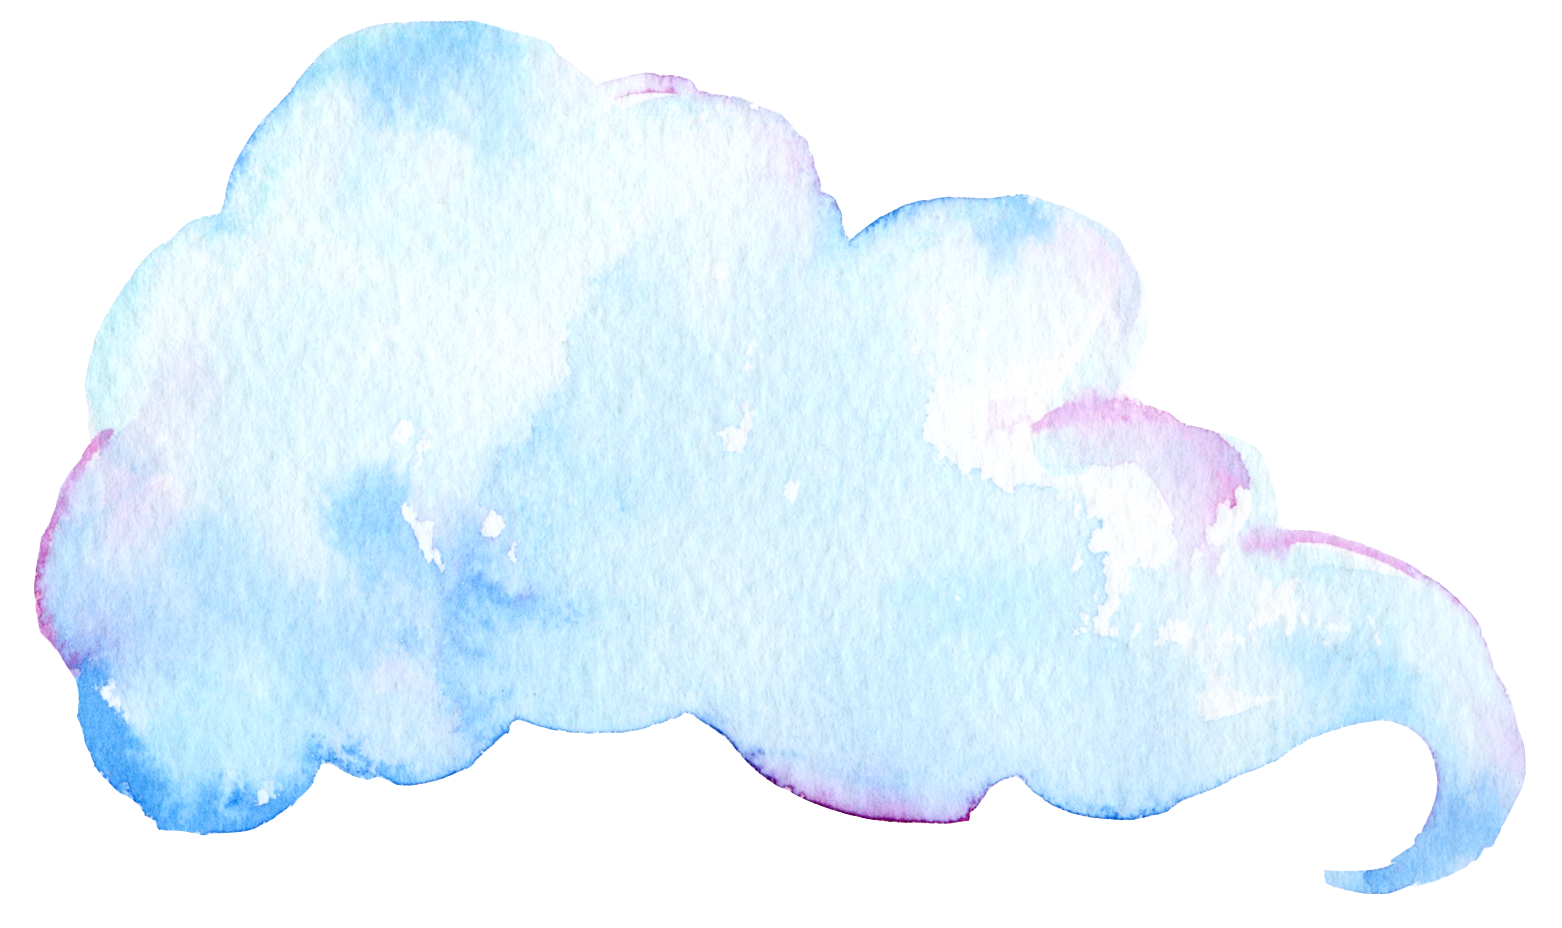 clipart clouds watercolor